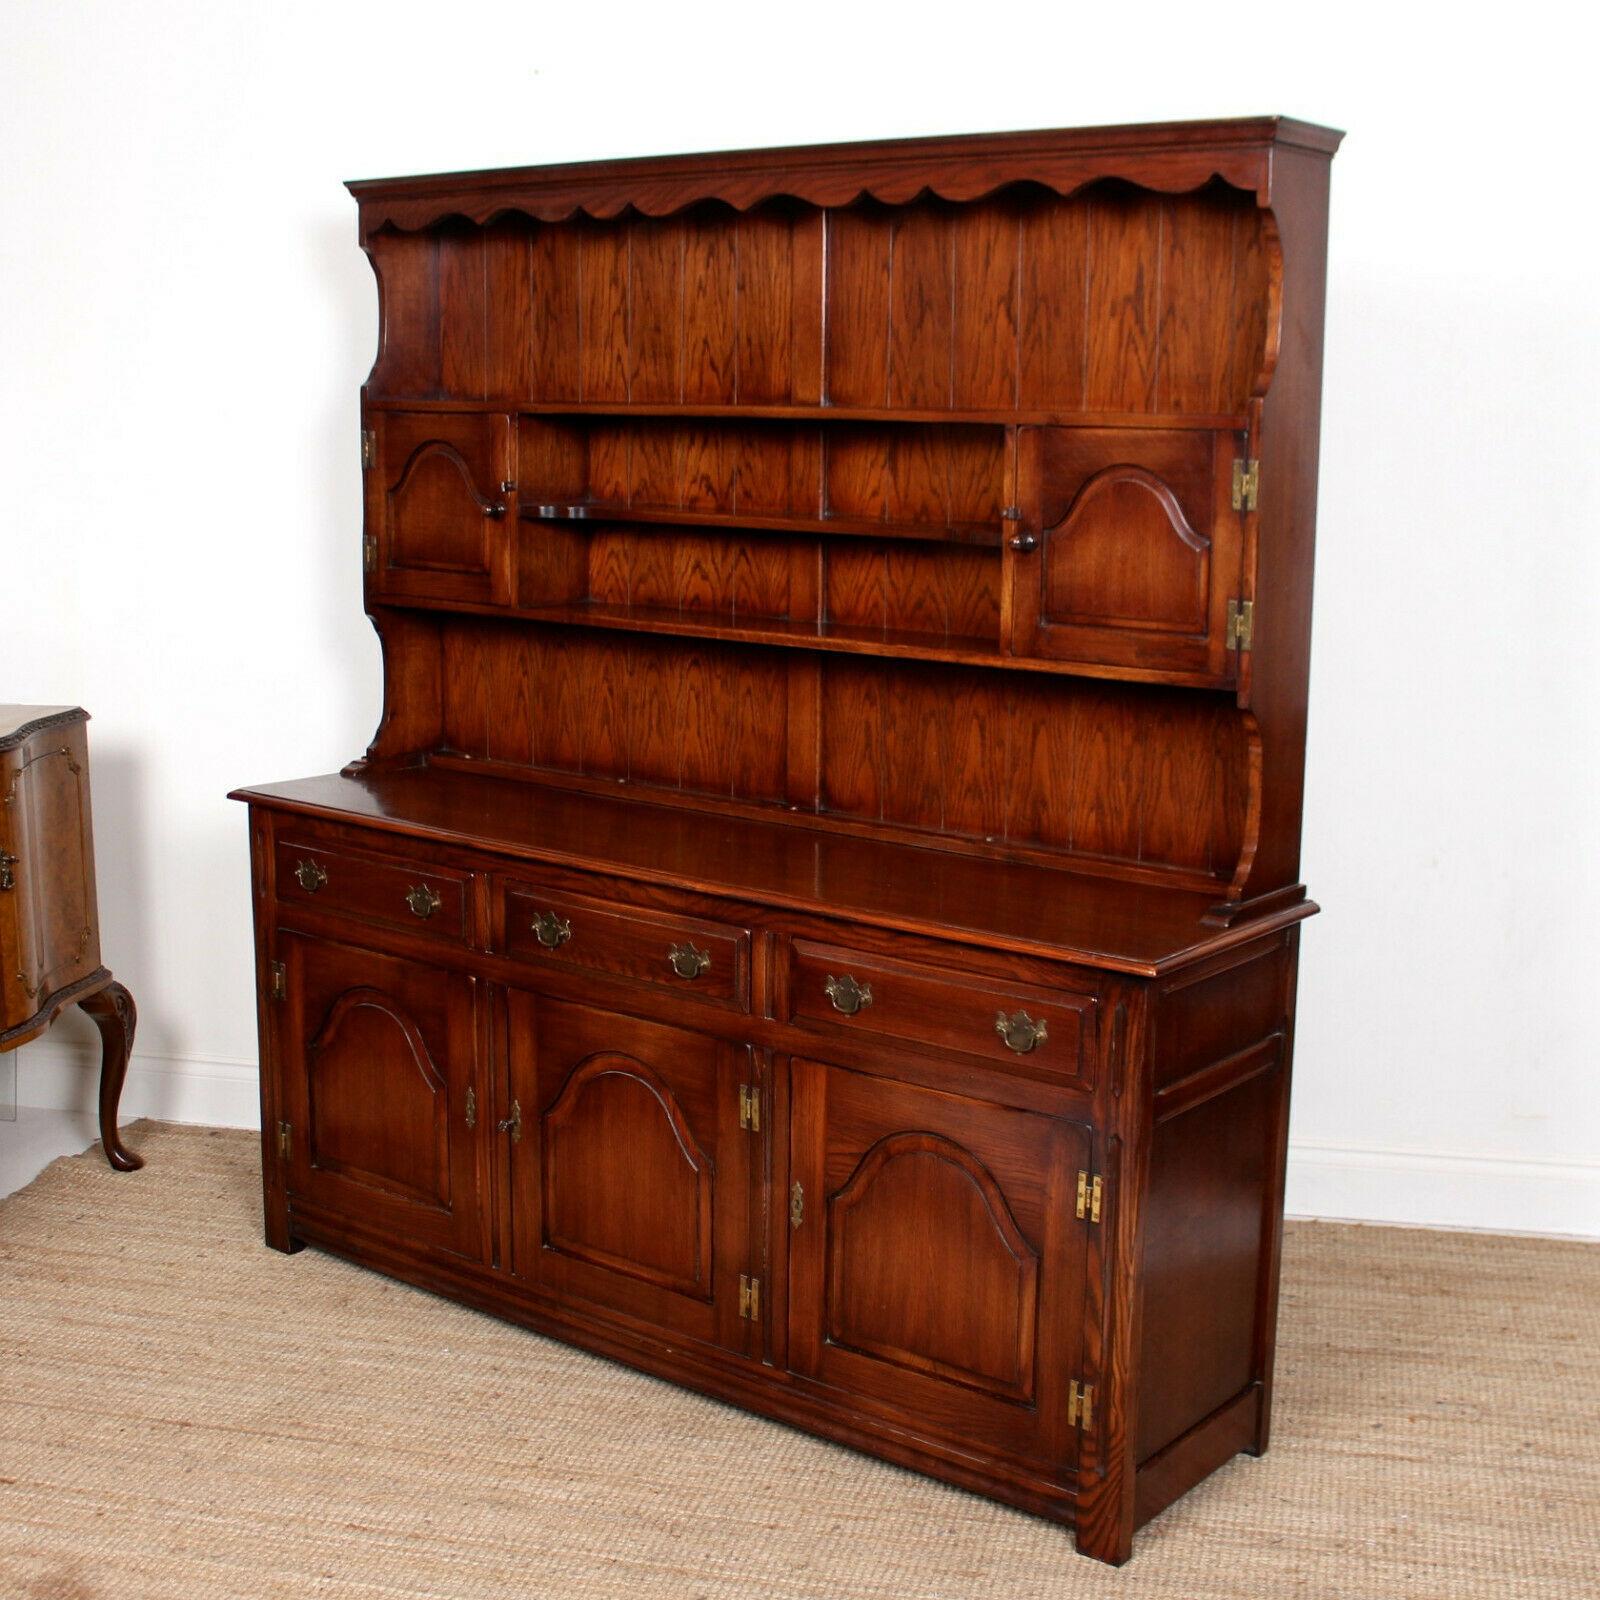 A fine quality oak dresser Bevan funnel.
The oak boasting a well figured grain and deep rich patina.
The upper section with carved apron to cornice above shelving and cupboards. The base fitted three drawers to frieze above carved paneled doors